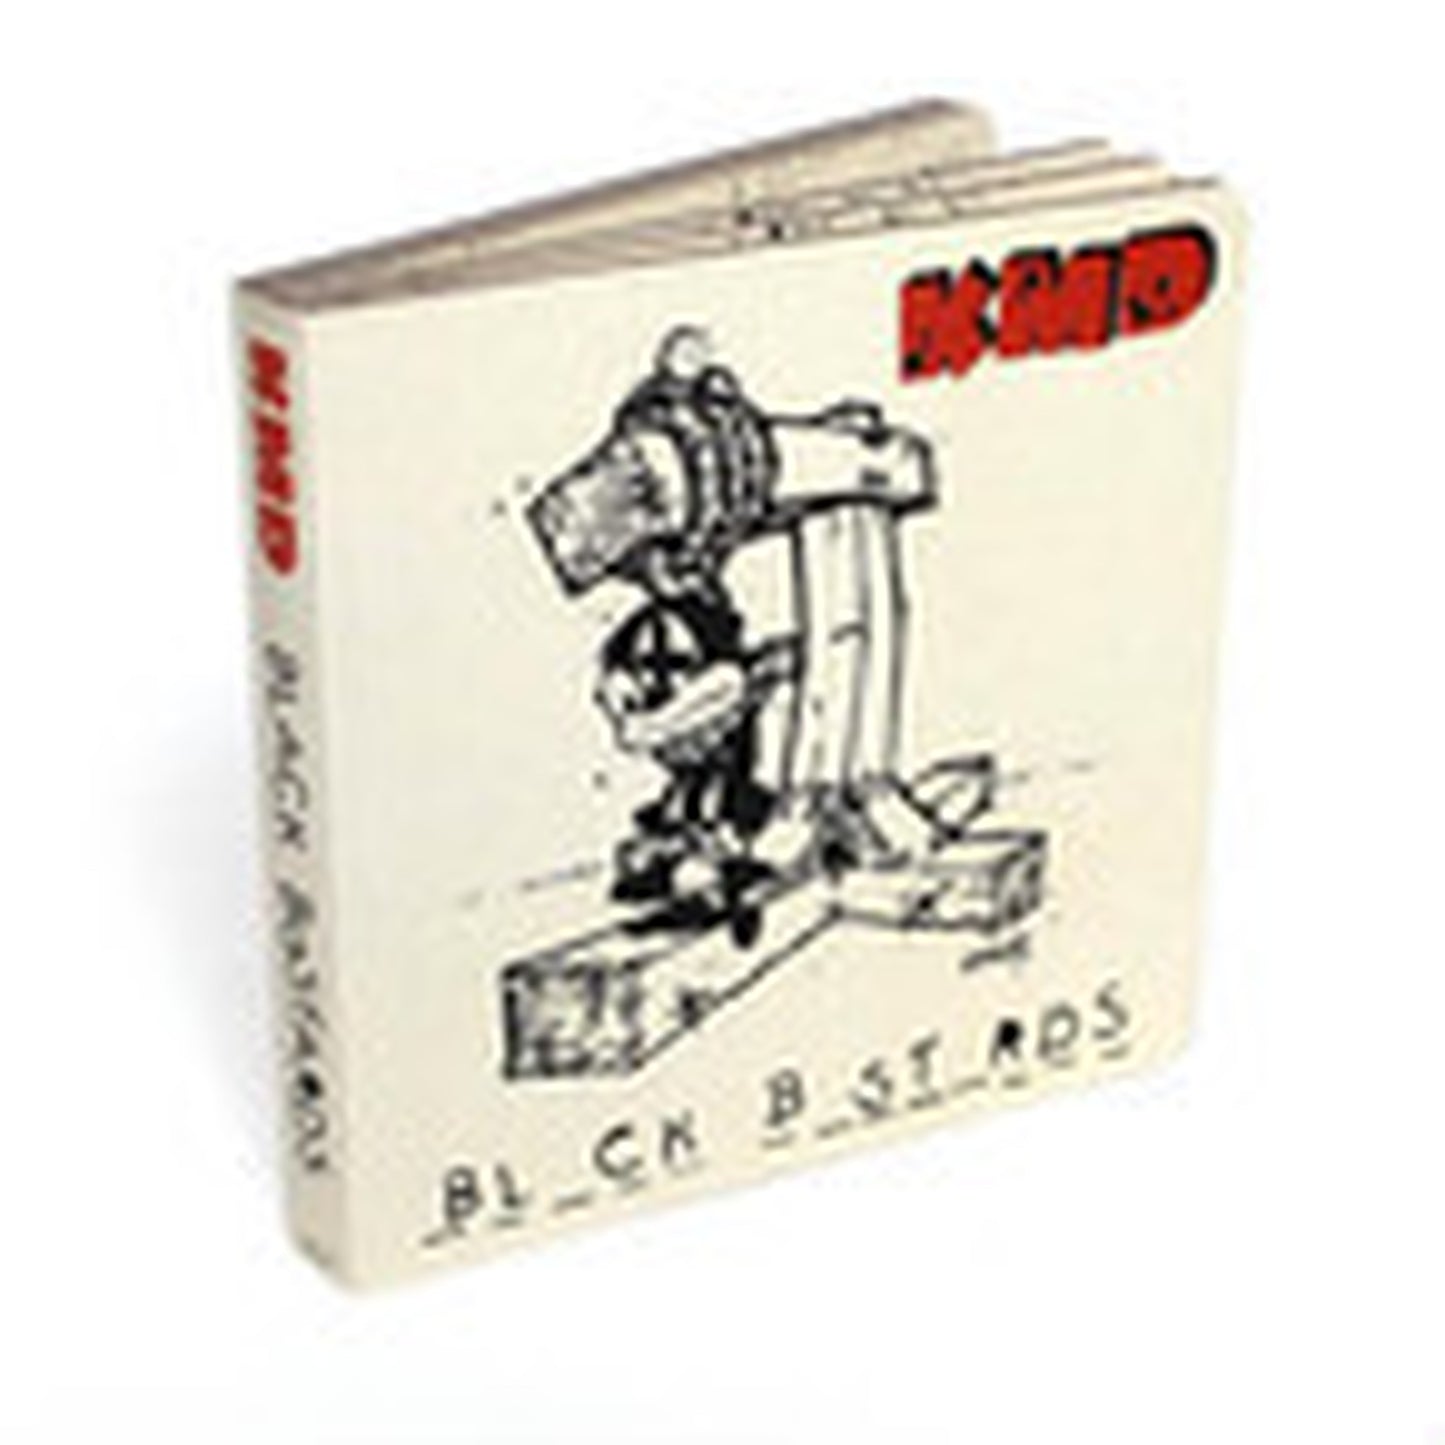 【CD】KMD - BL_CK B_ST_RDS (DELUXE 2CD EDITION)